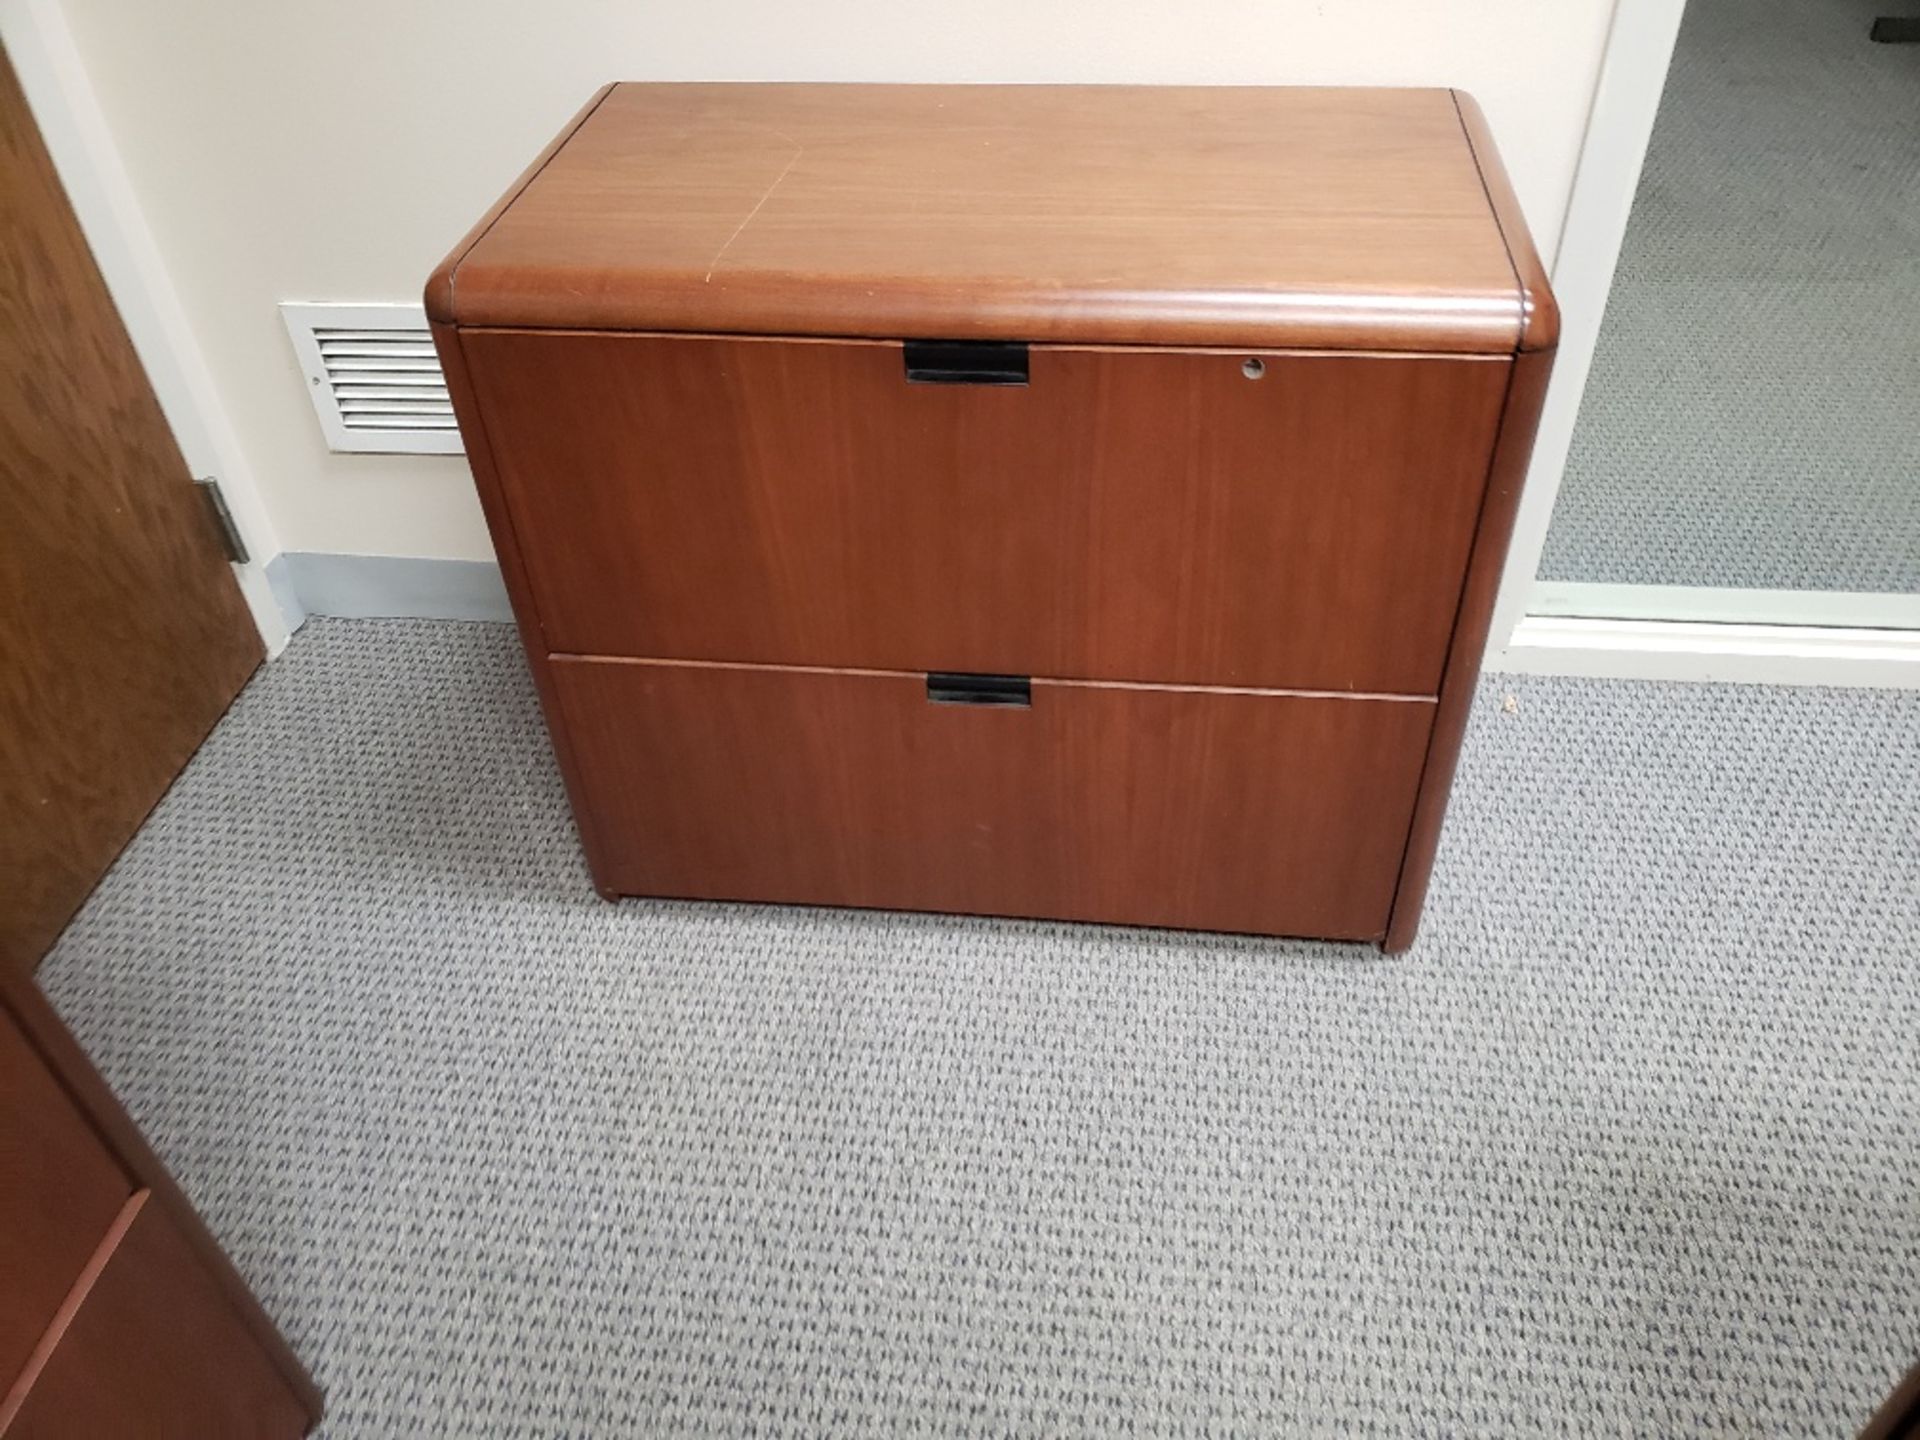 EXECUTIVE DESK, CREDENZA, TWO DOOR LATERAL FILE CABINET - Image 4 of 4